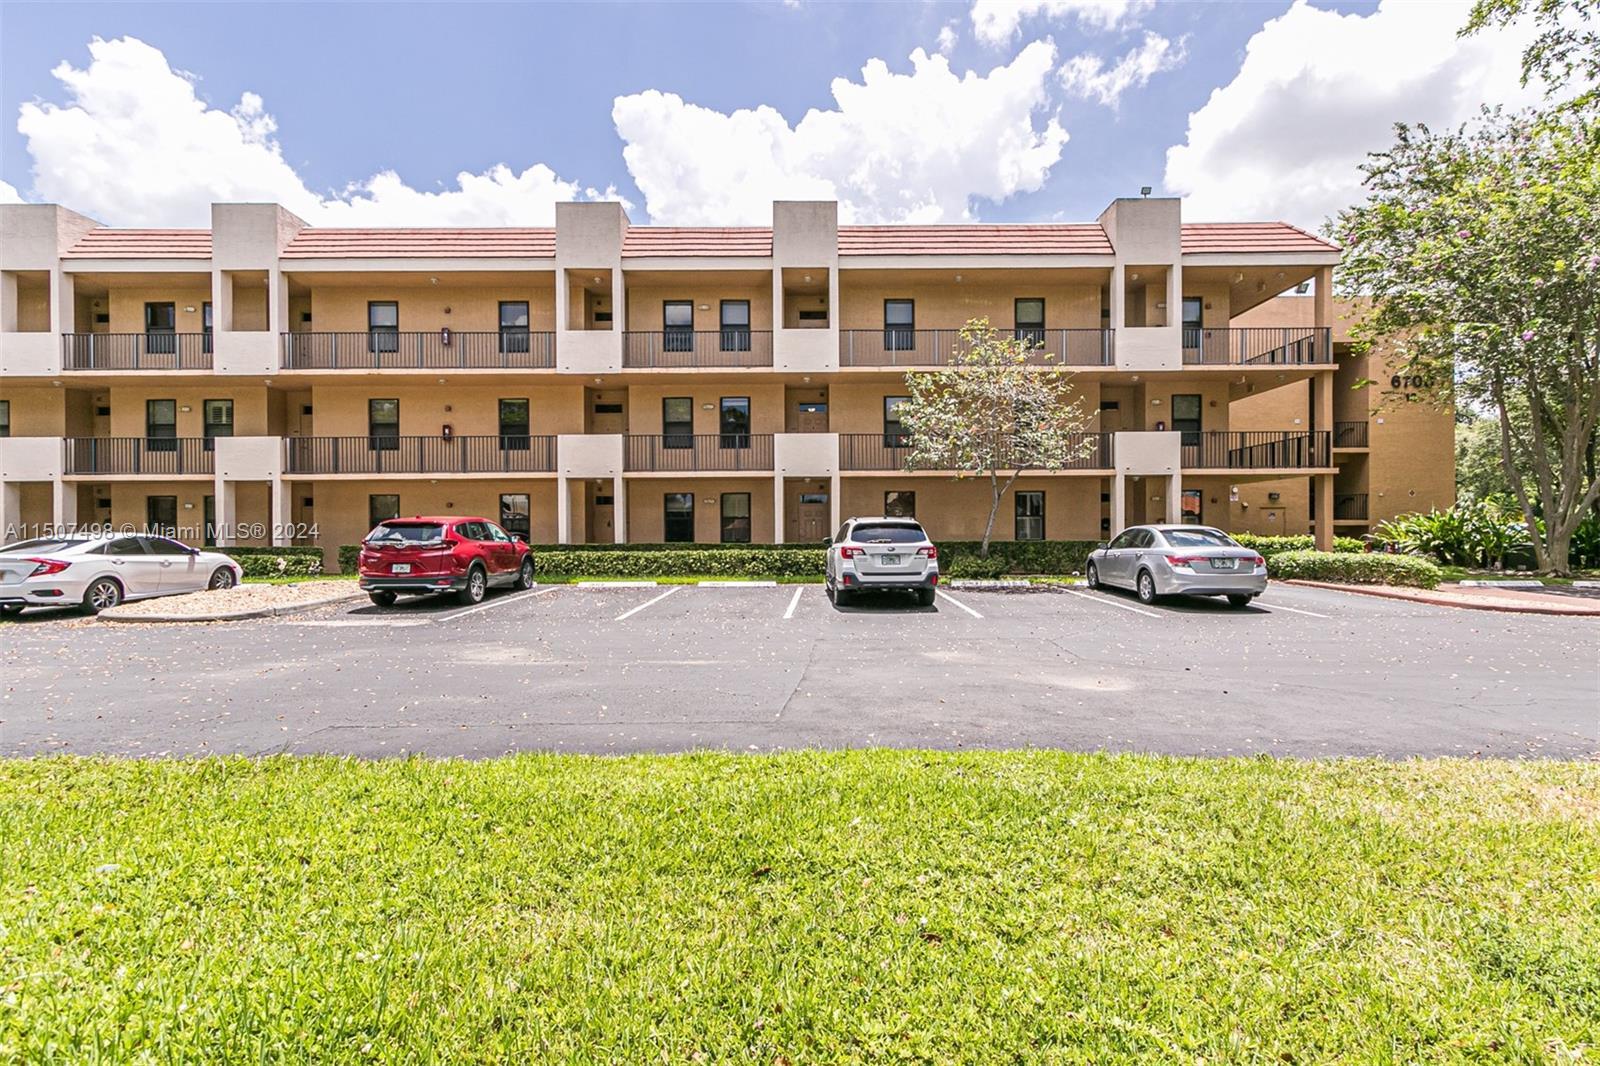 Photo of 6720 Coral Lake Dr #6720 in Margate, FL